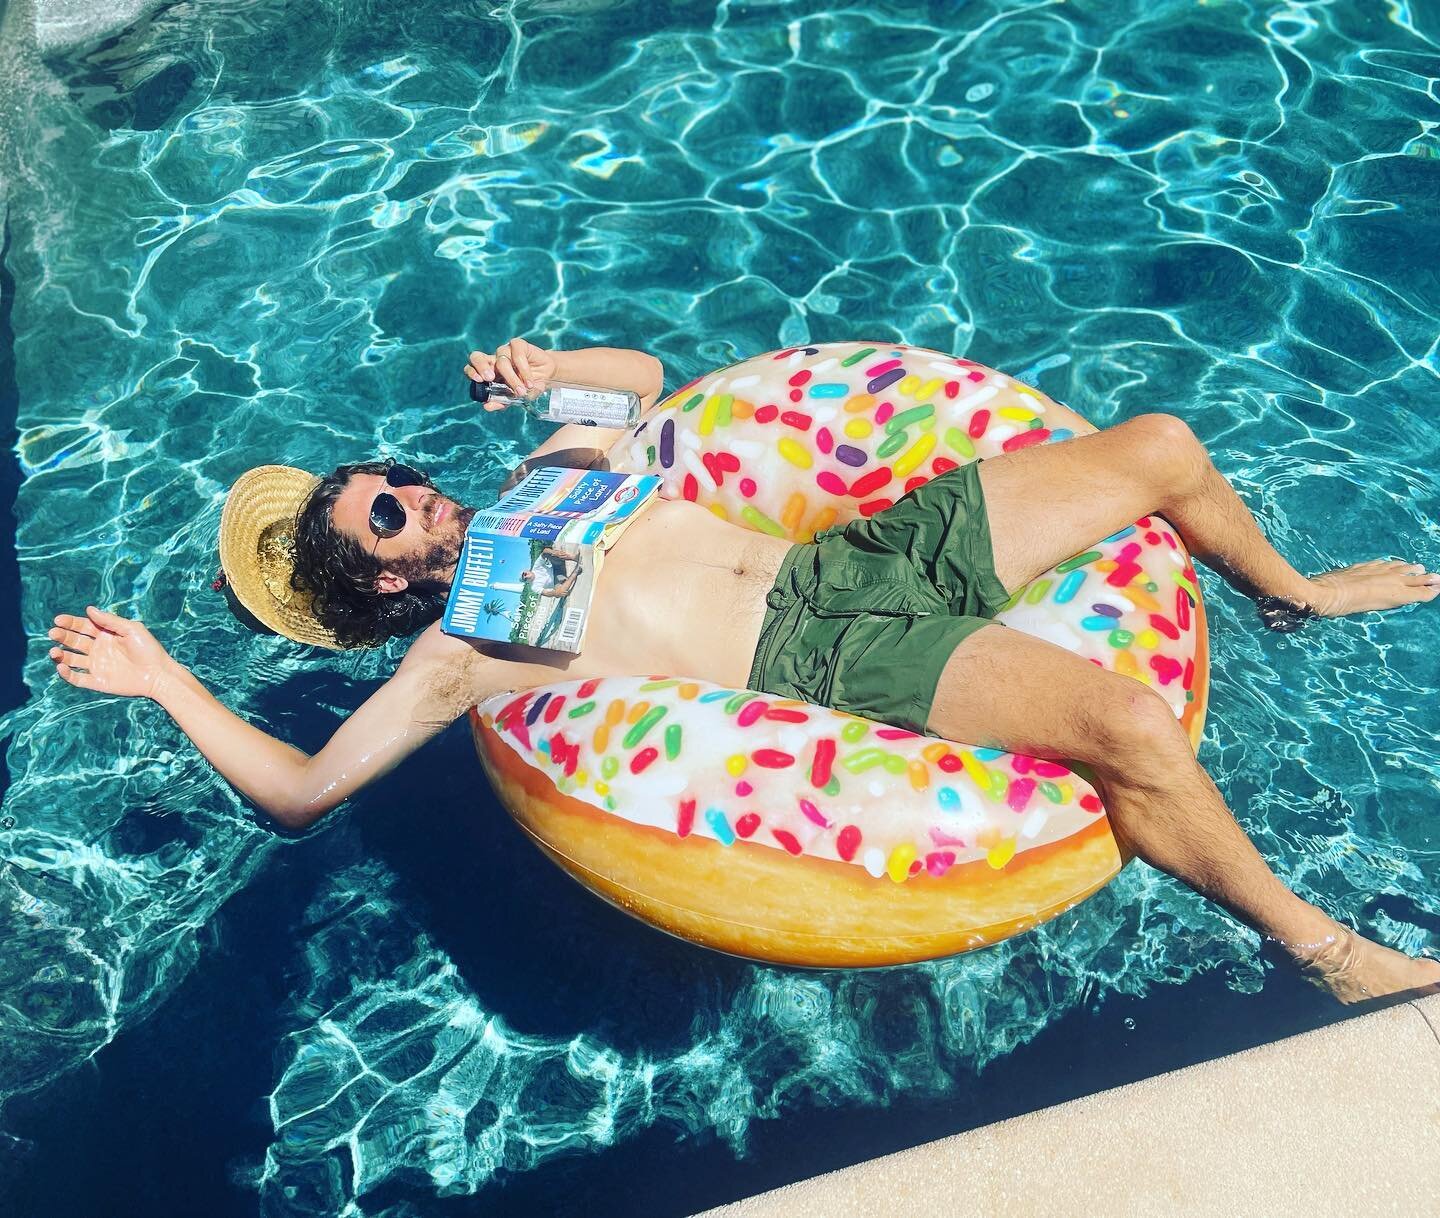 🍩 A donut in paradise 

Creative direction by Isaak.